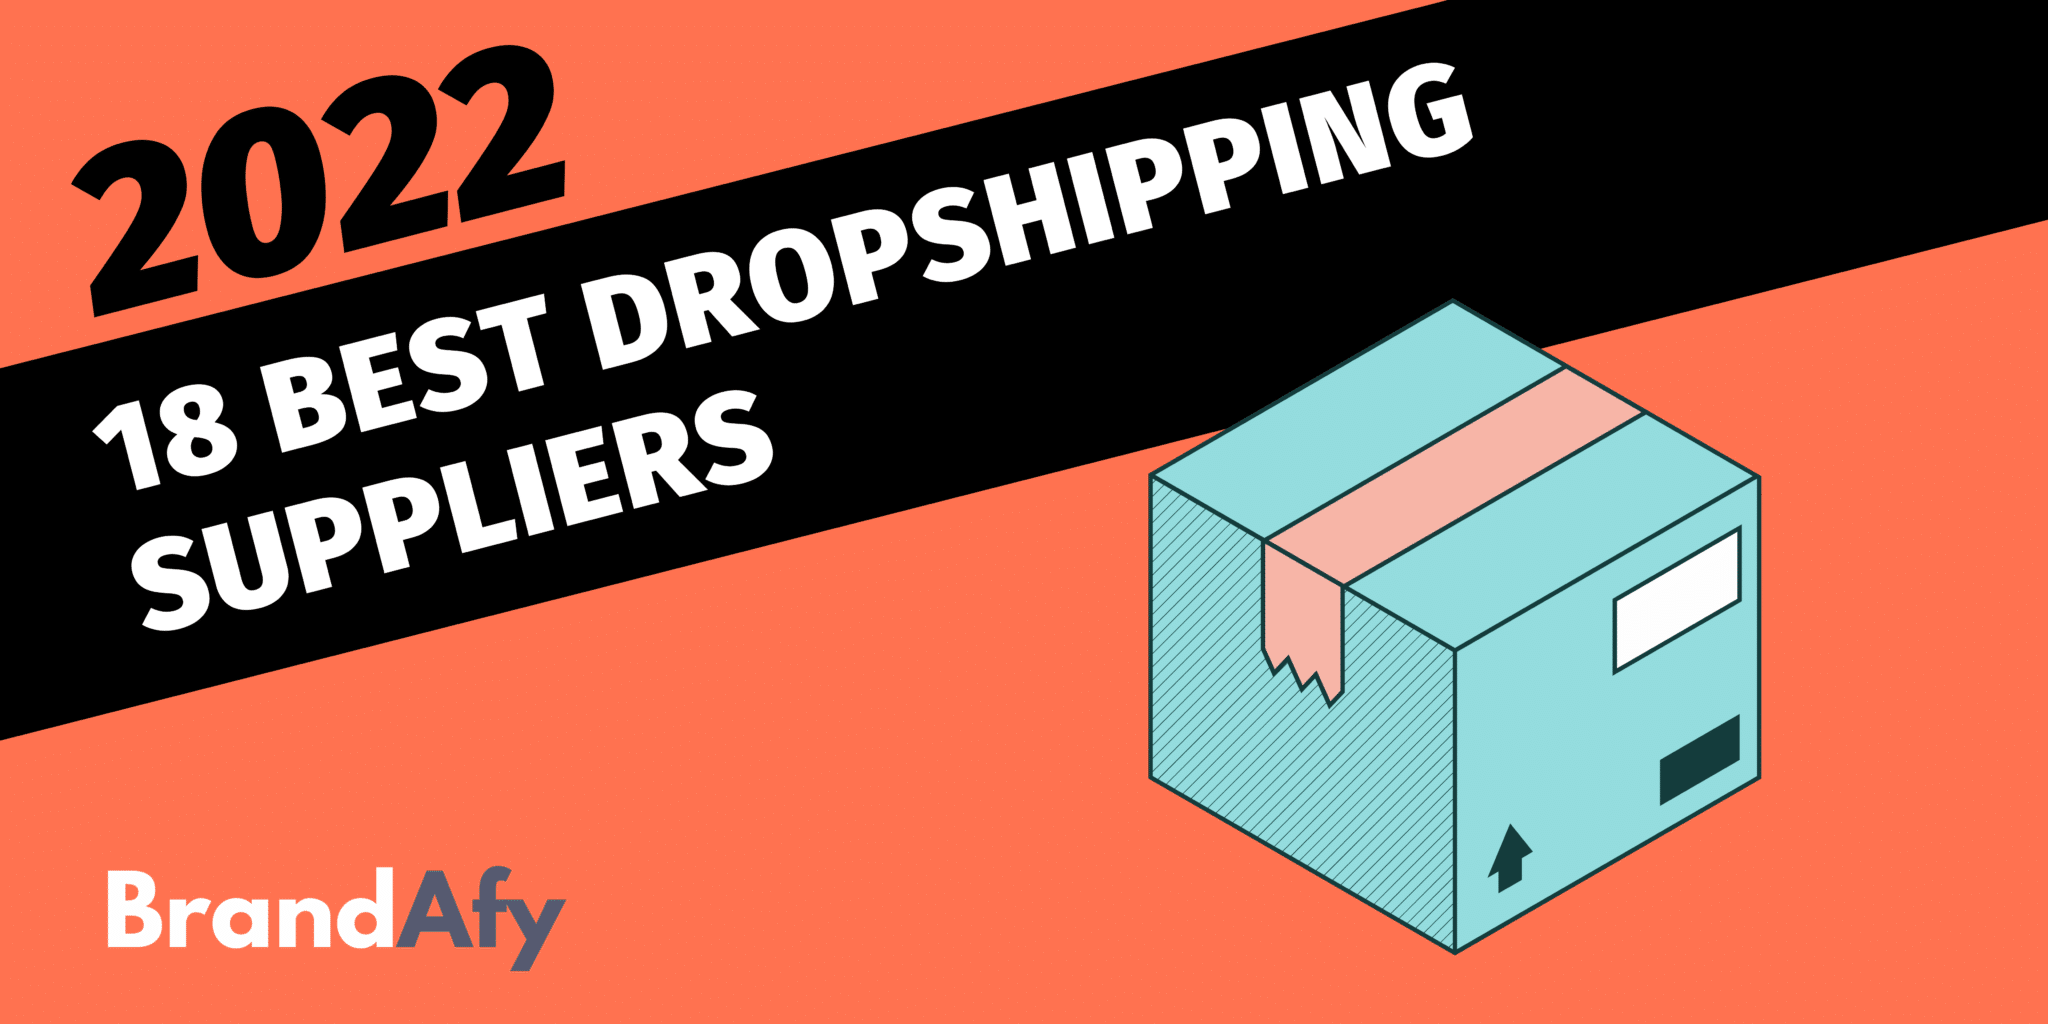 best dropshipping suppliers